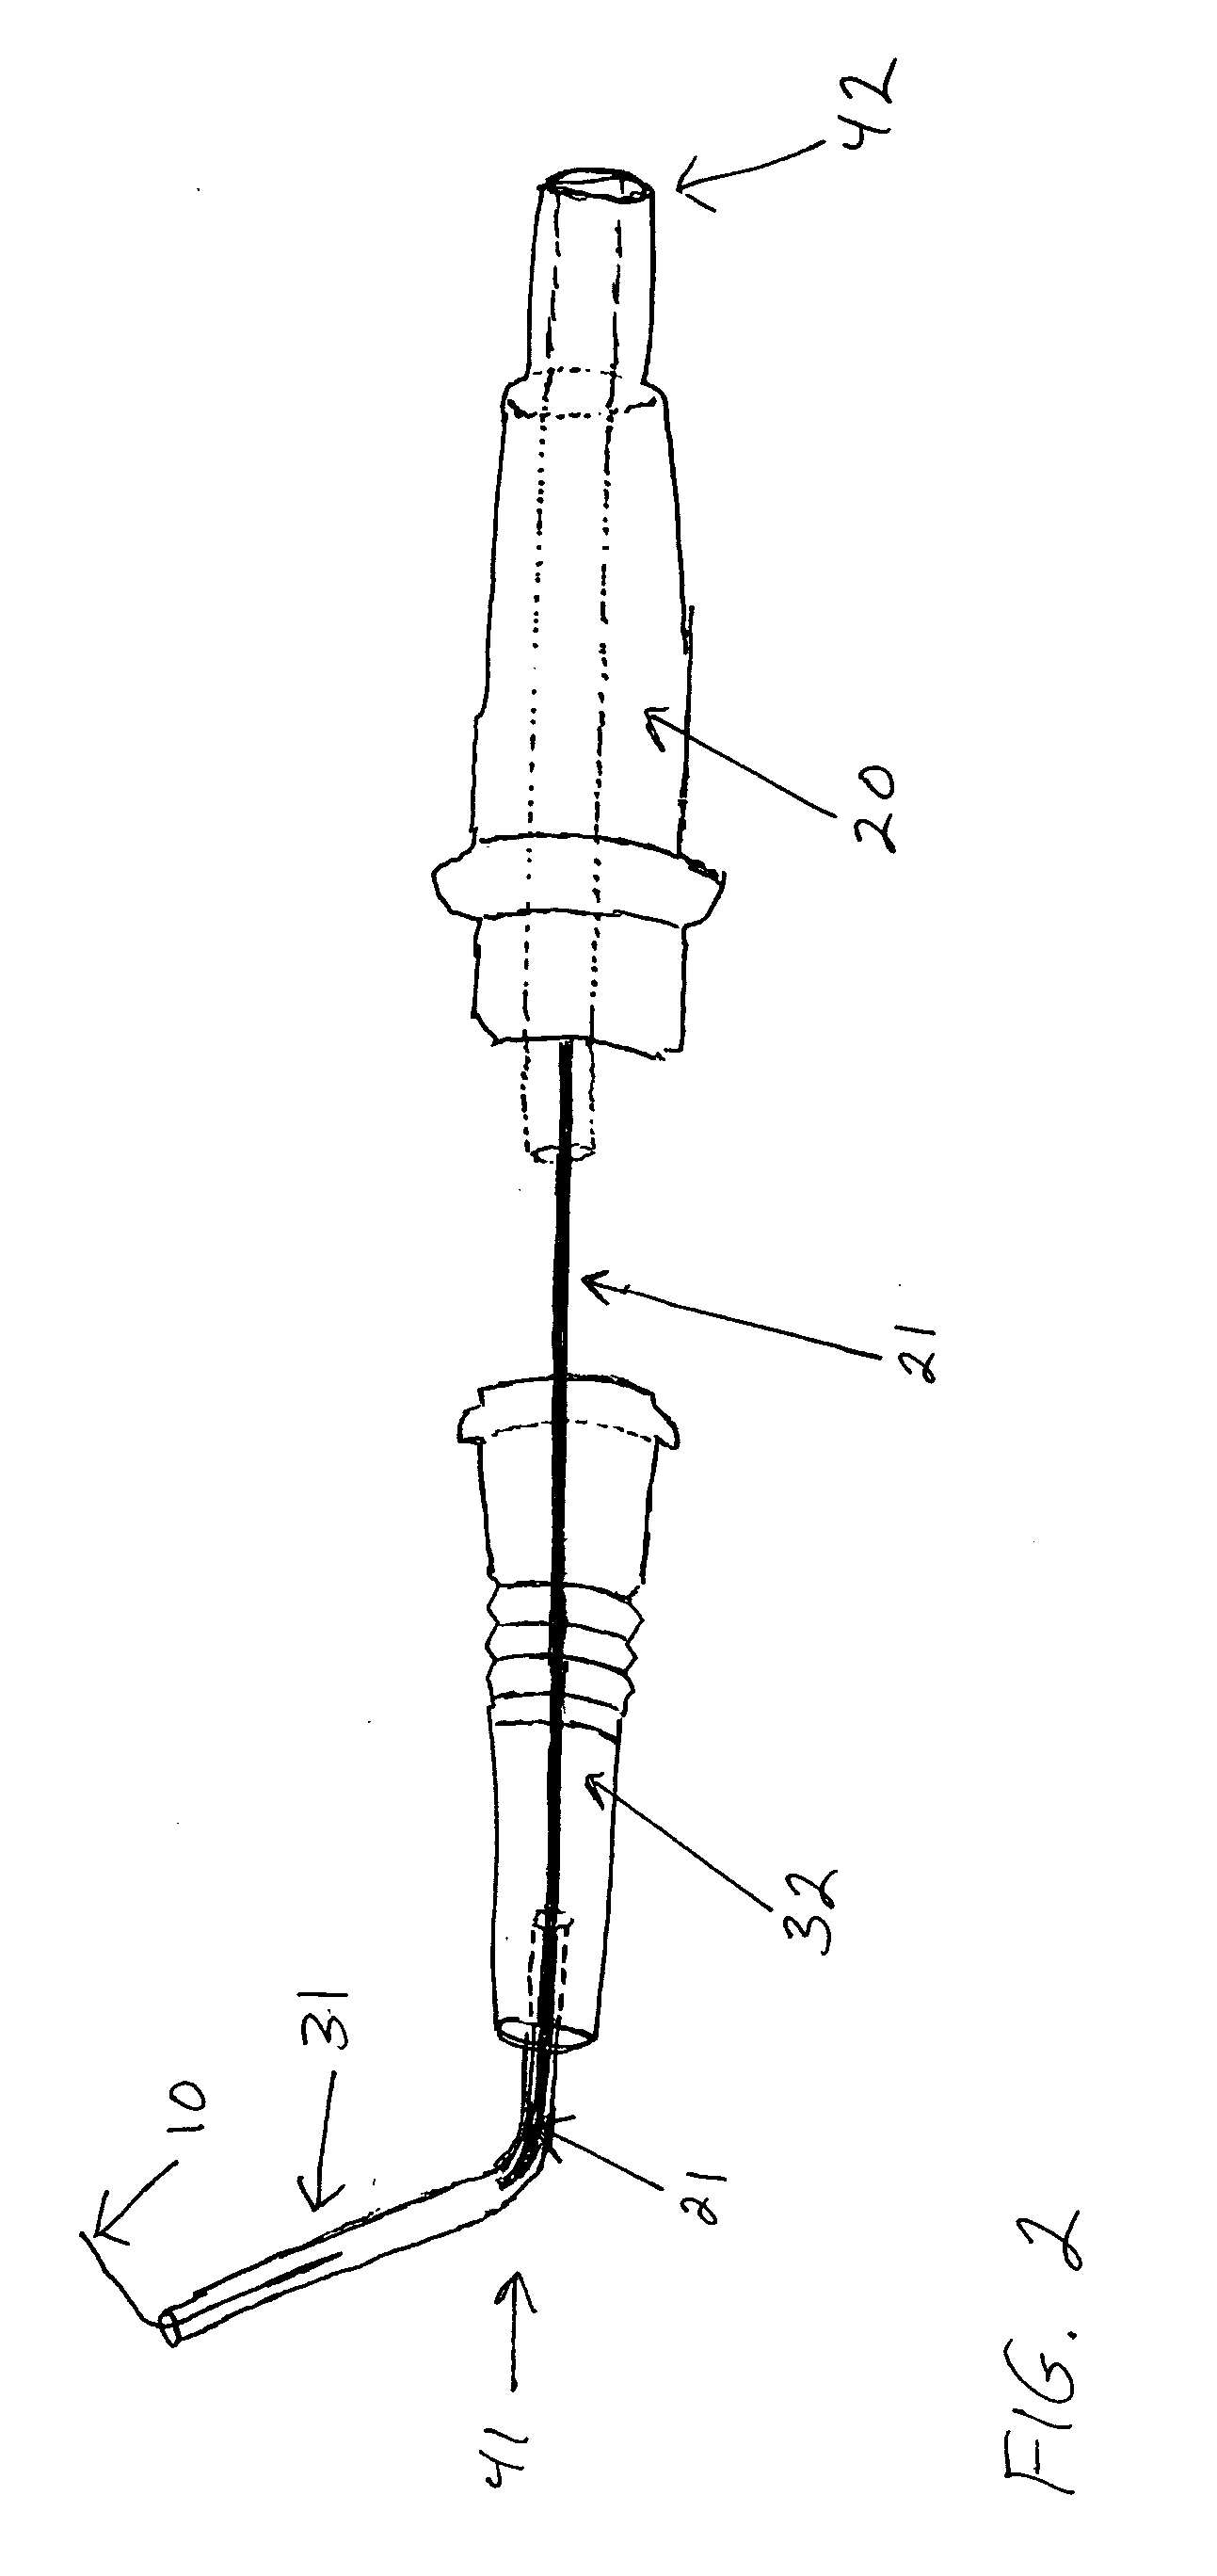 Methods and apparatus for minimally invasive transverse aortic banding